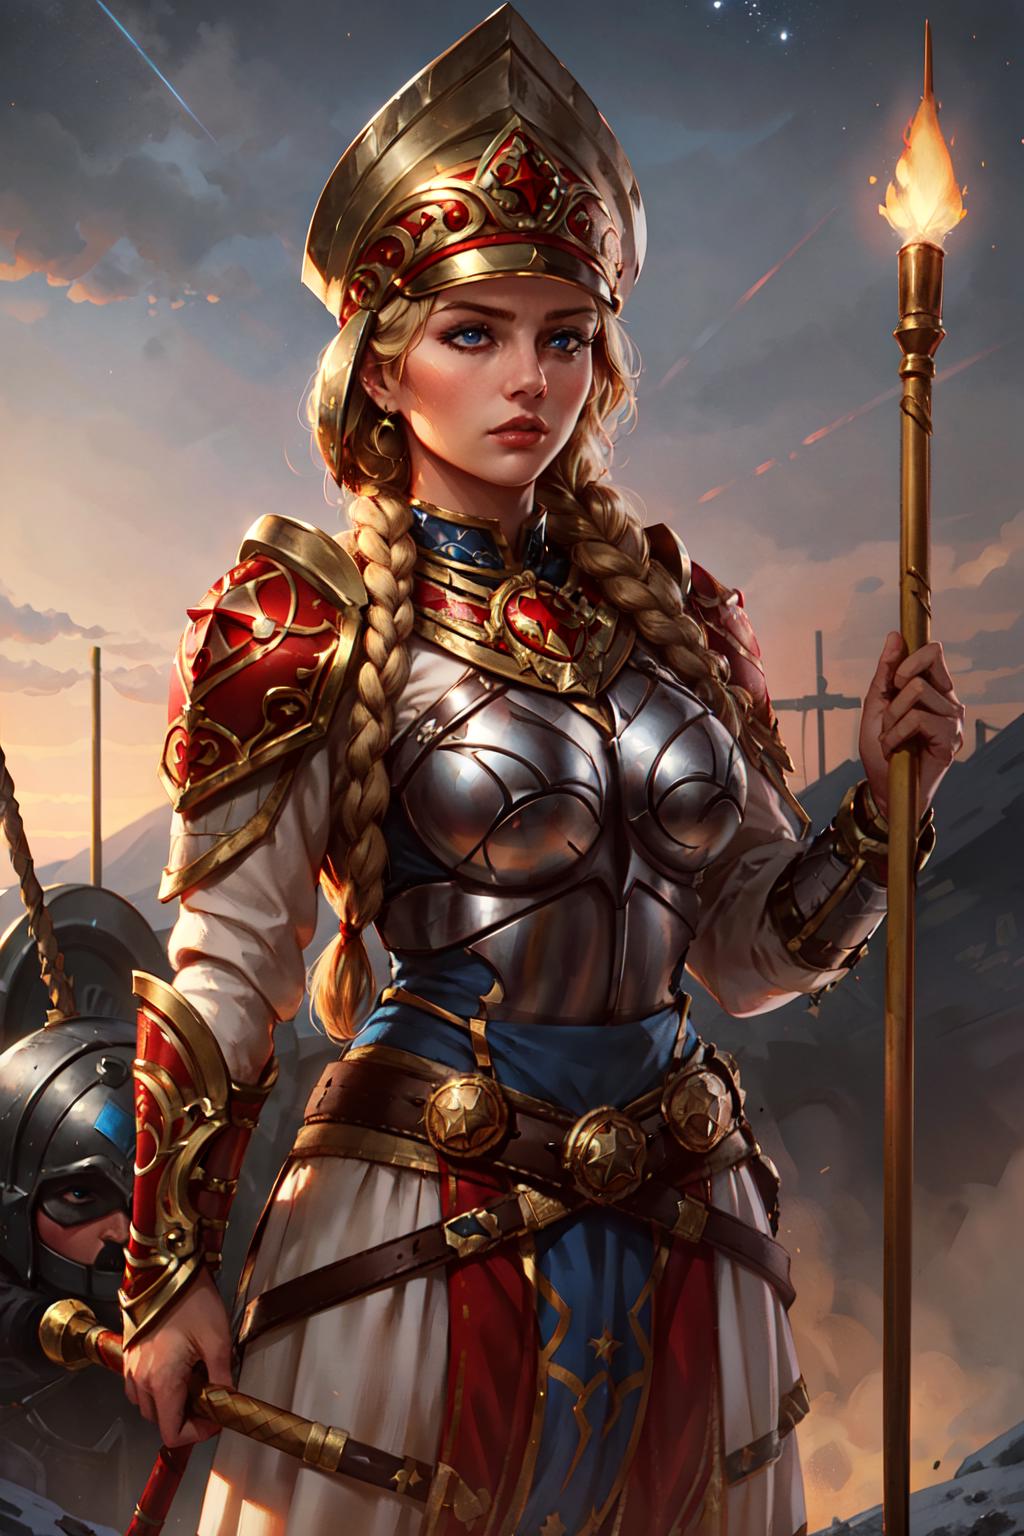 A warrior princess wearing a chainmail dress and a gold crown holds a staff.